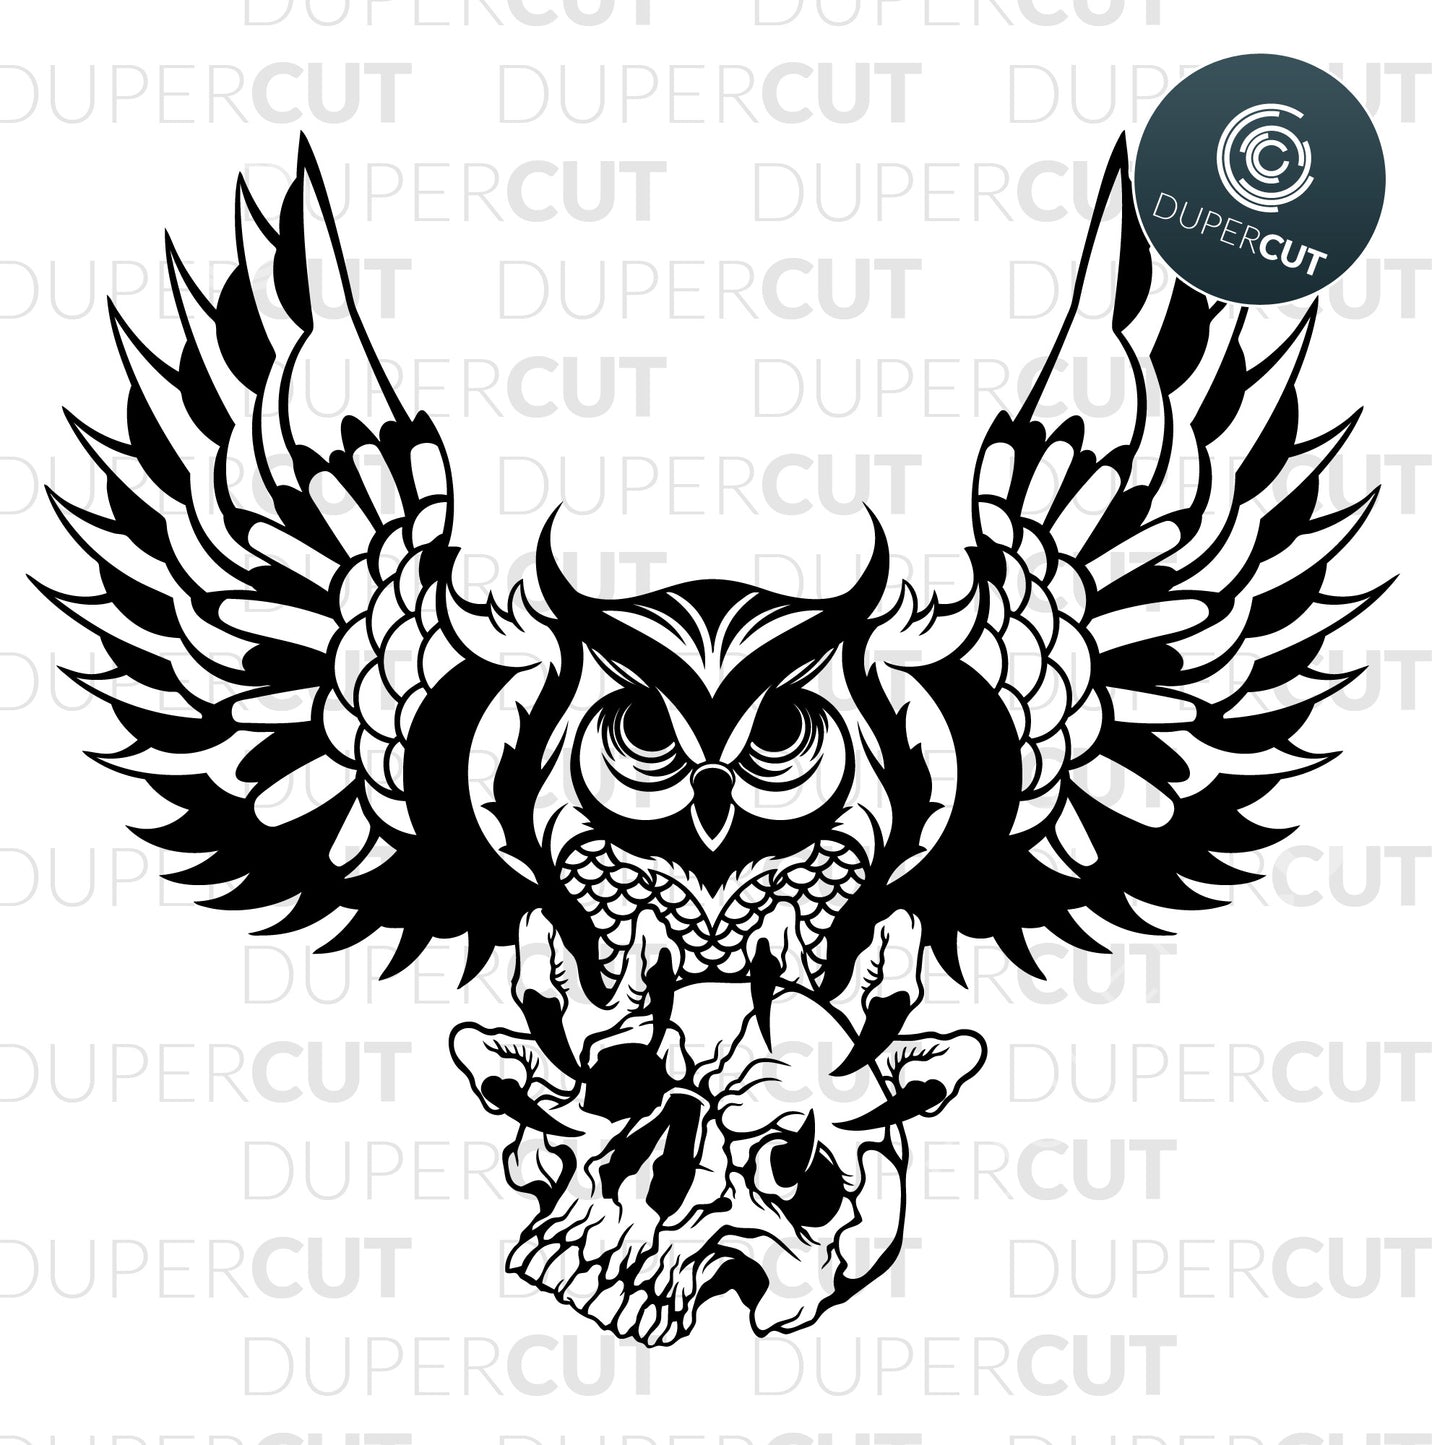 Owl with skull black line drawing,  gothic illustration  - SVG DXF JPEG files for CNC machines, laser cutting, Cricut, Silhouette Cameo, Glowforge engraving